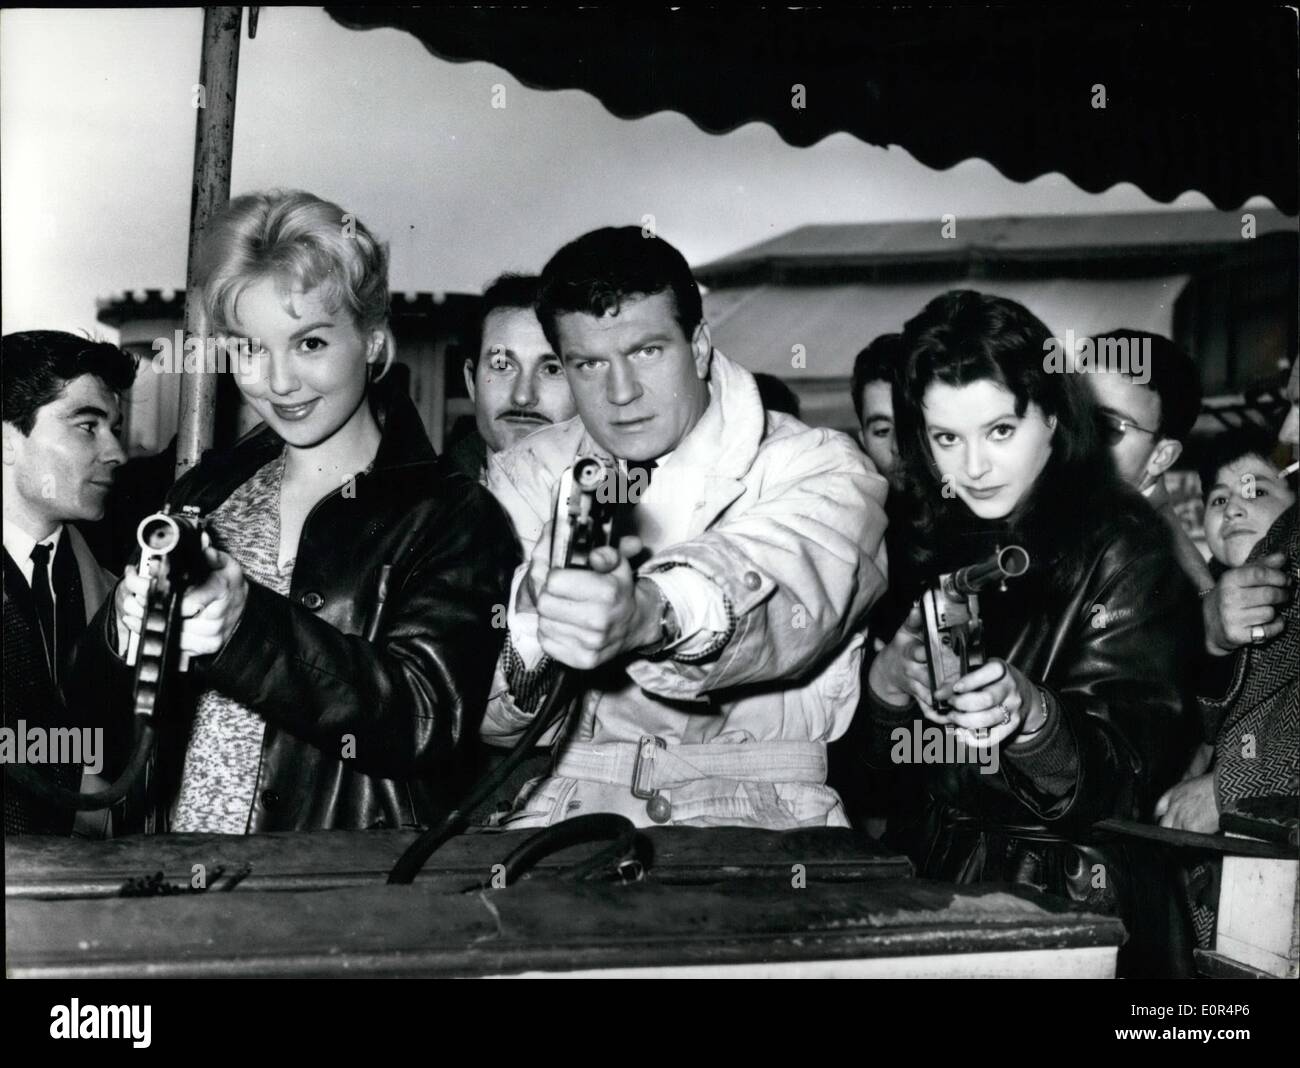 Feb. 02, 1958 - Hold-Up? No,Movies: A Sequence Of Marc Allegret's New Film ''Sois Belle Et Tais-Toi'' (Be Beautiful And Keep Quiet) Was Made At La Villette Fair, In Paris, Today. Photo shows From Left To Right: Mylene Demangeot : Henri Vidal And Alta Riba, The Actors Co-Starring In The Film, Having Some Fun In A Shooting Gallery. Stock Photo